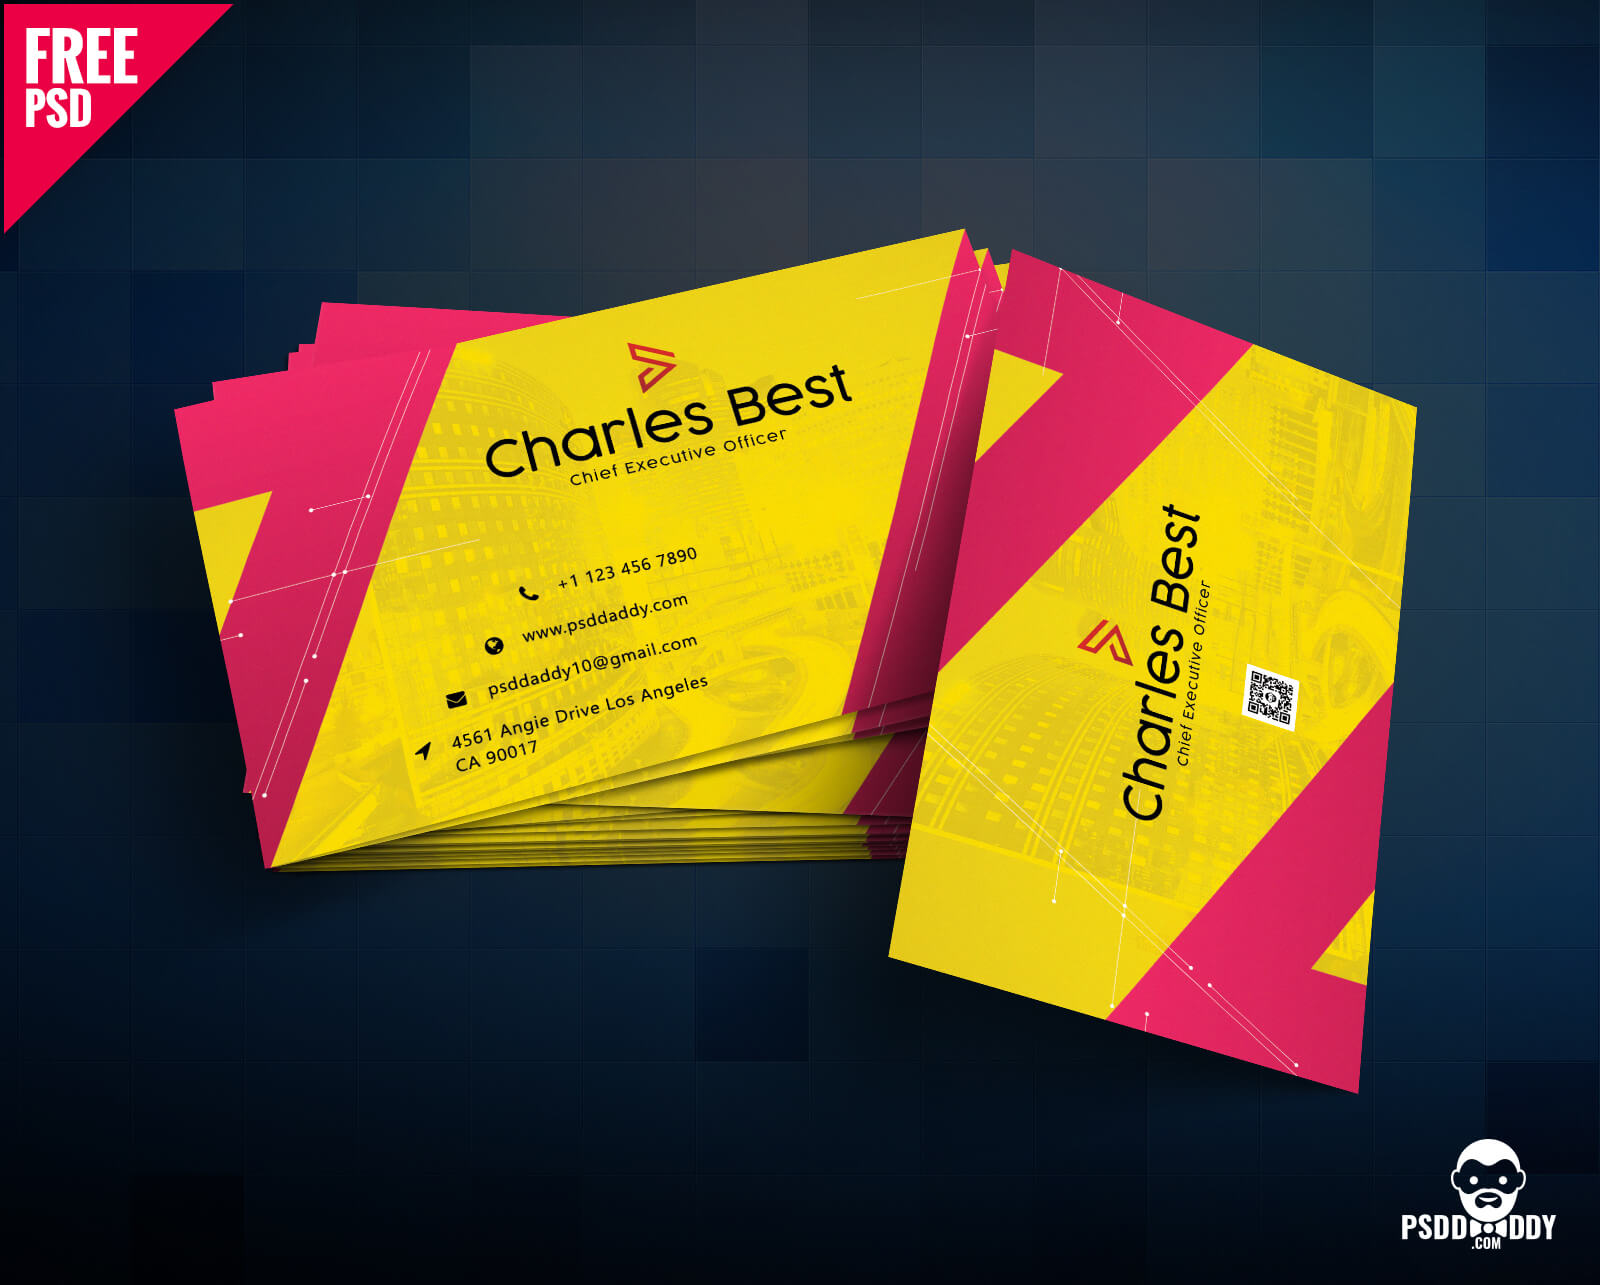 Download] Creative Business Card Free Psd | Psddaddy Pertaining To Photoshop Business Card Template With Bleed